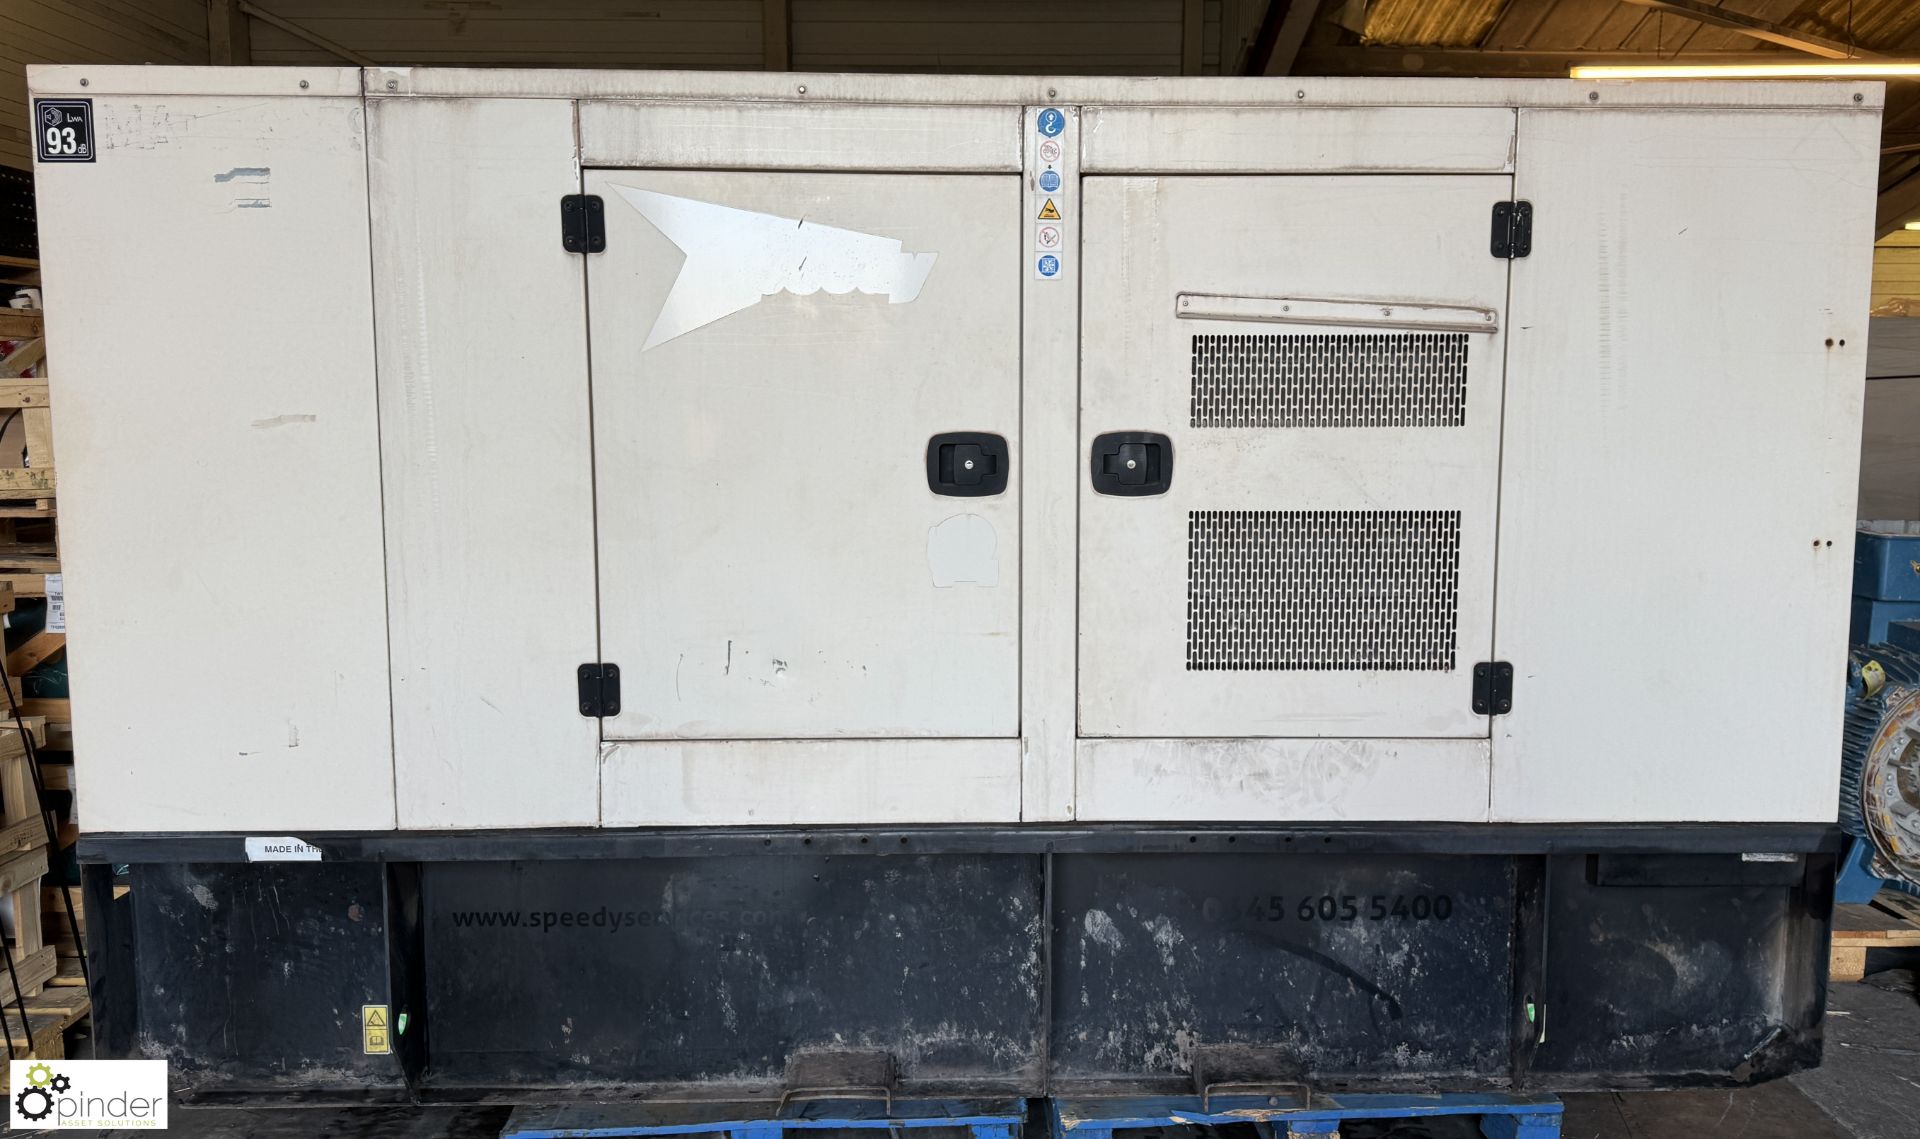 FG Wilson XD100 P4 skid mounted Generator, 100kva, 3 x 415volts outlets, 3 x 240volts outlets, Leroy